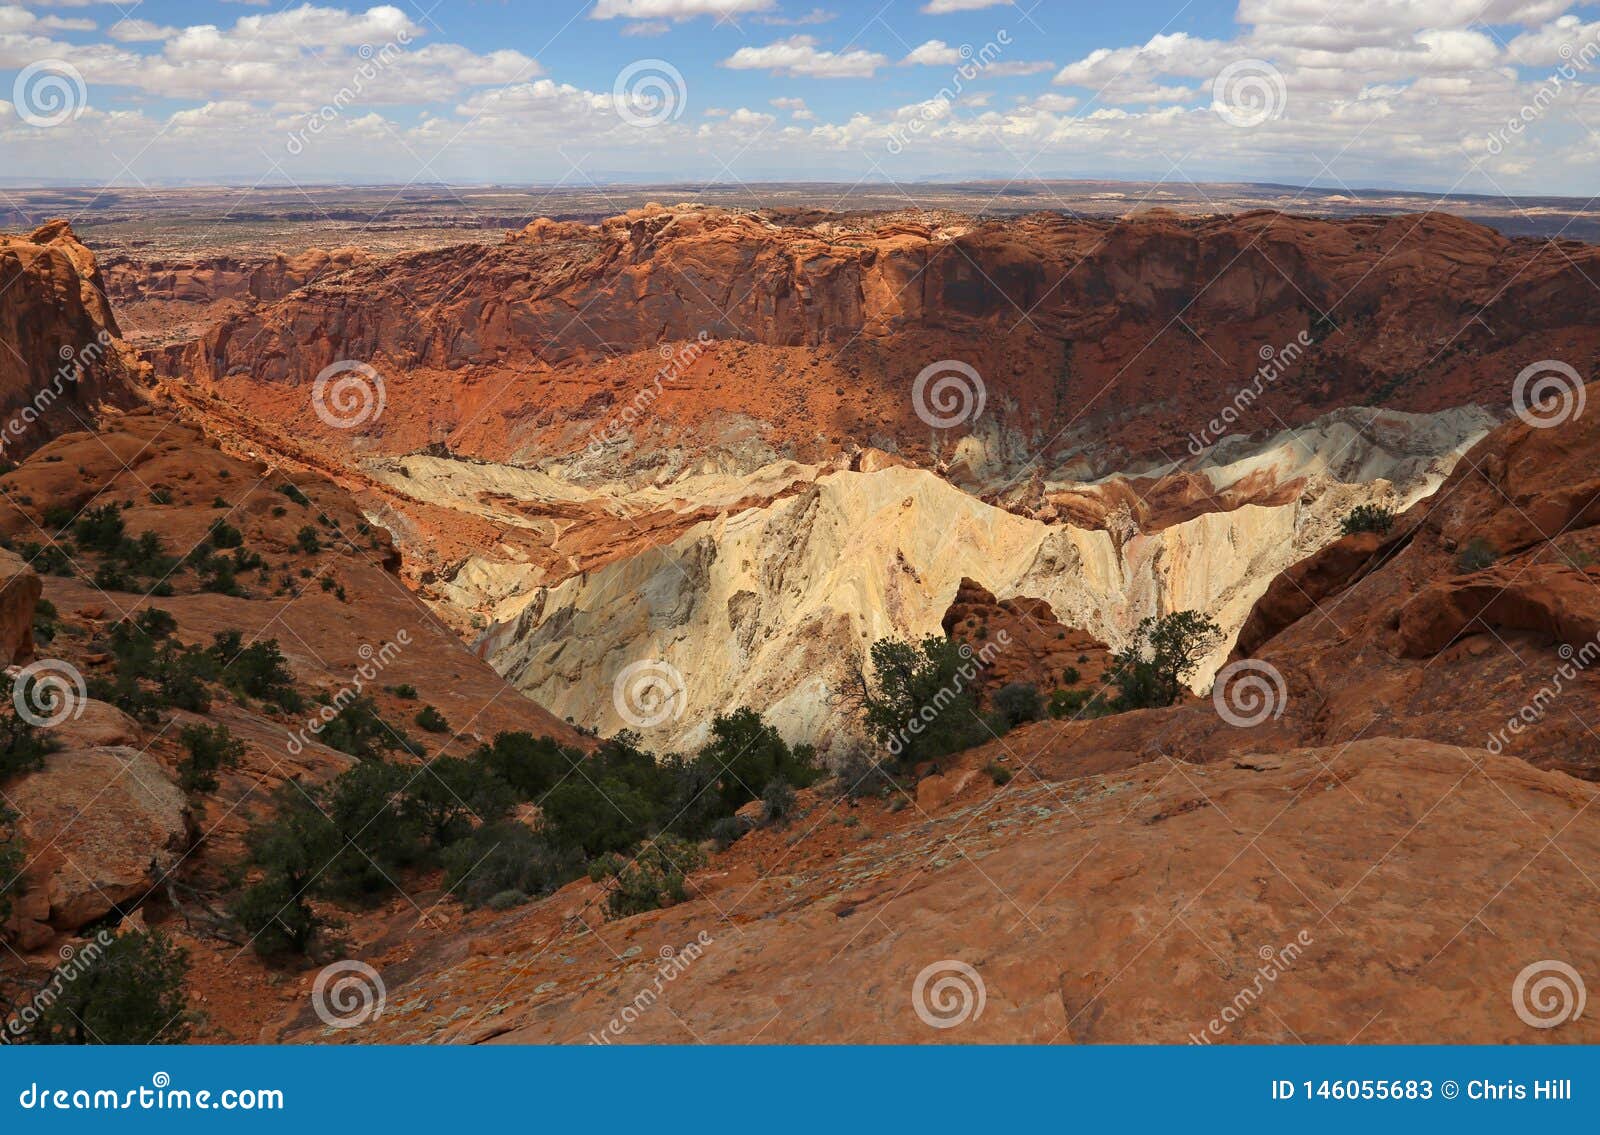 the upheaval dome